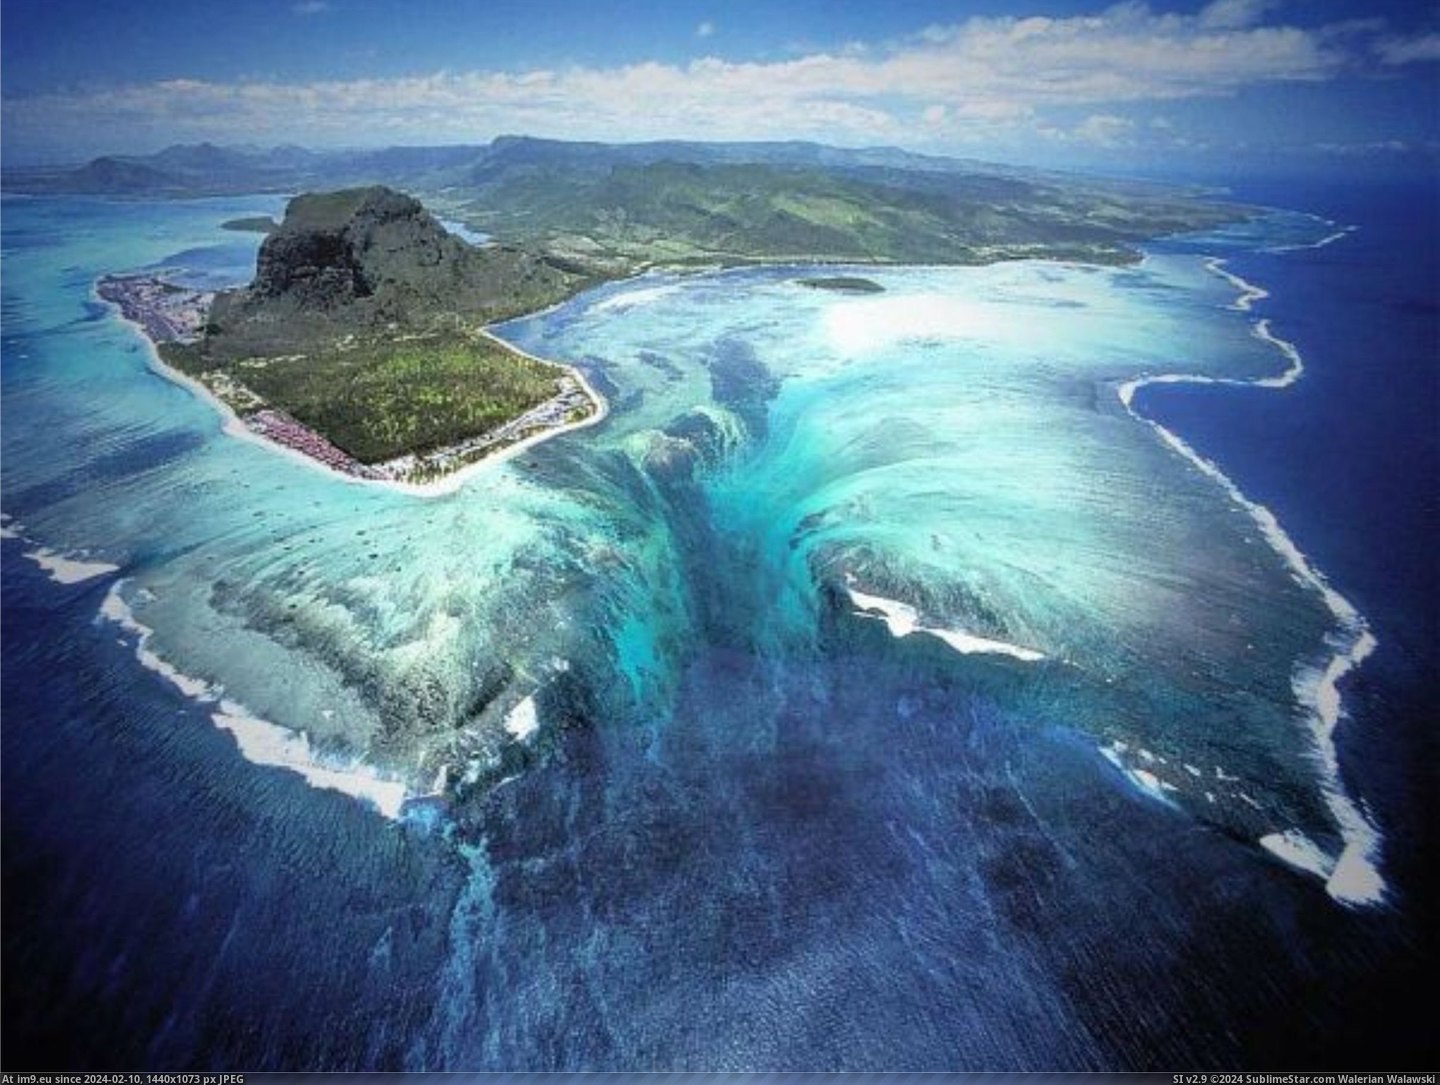 #Wallpapers #Island #Michael #Mauritius #Friedel #Underwater #Enormous #Plateau [Earthporn] Enormous underwater plateau - Island of Mauritius - by Michael Friedel [2420x1815] Pic. (Obraz z album My r/EARTHPORN favs))